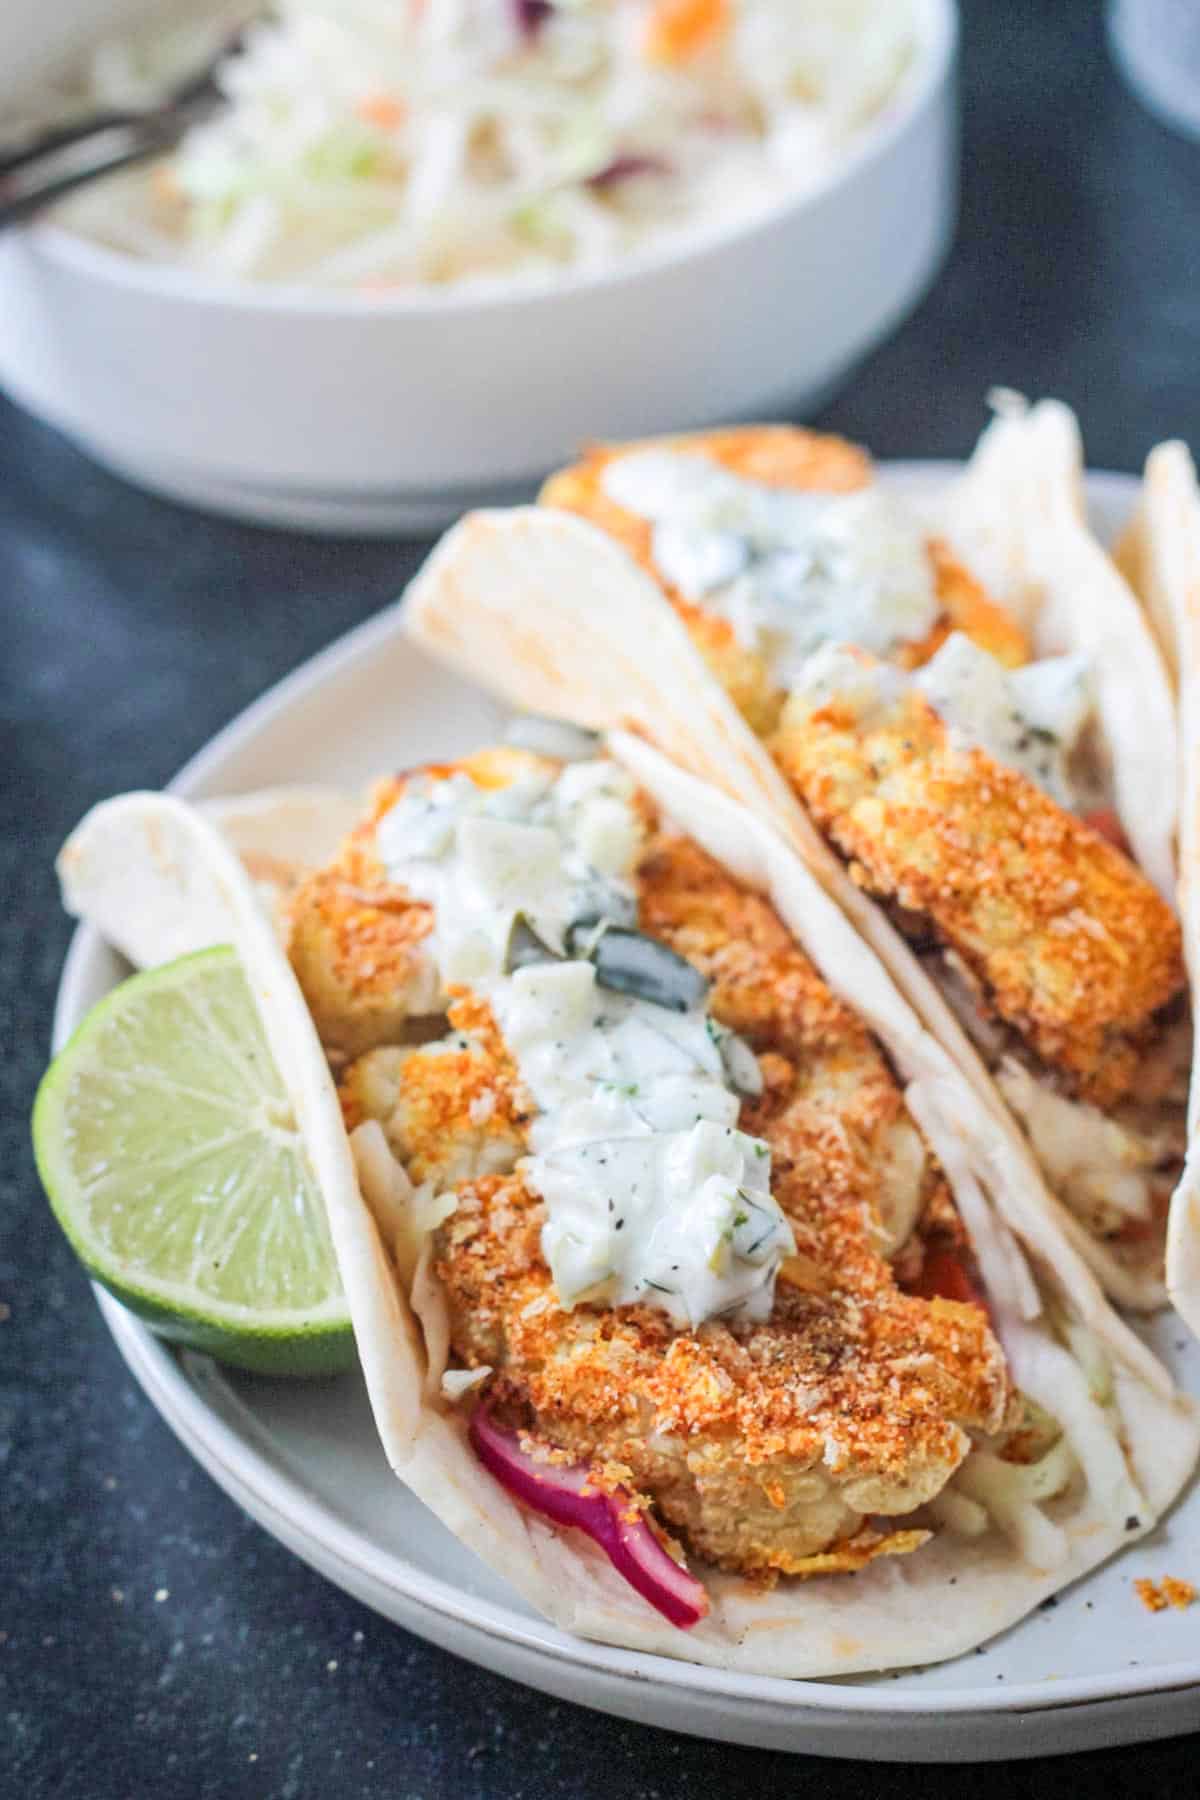 Crispy breaded cauliflower pieces wrapped in a tortilla and topped with tartar sauce.